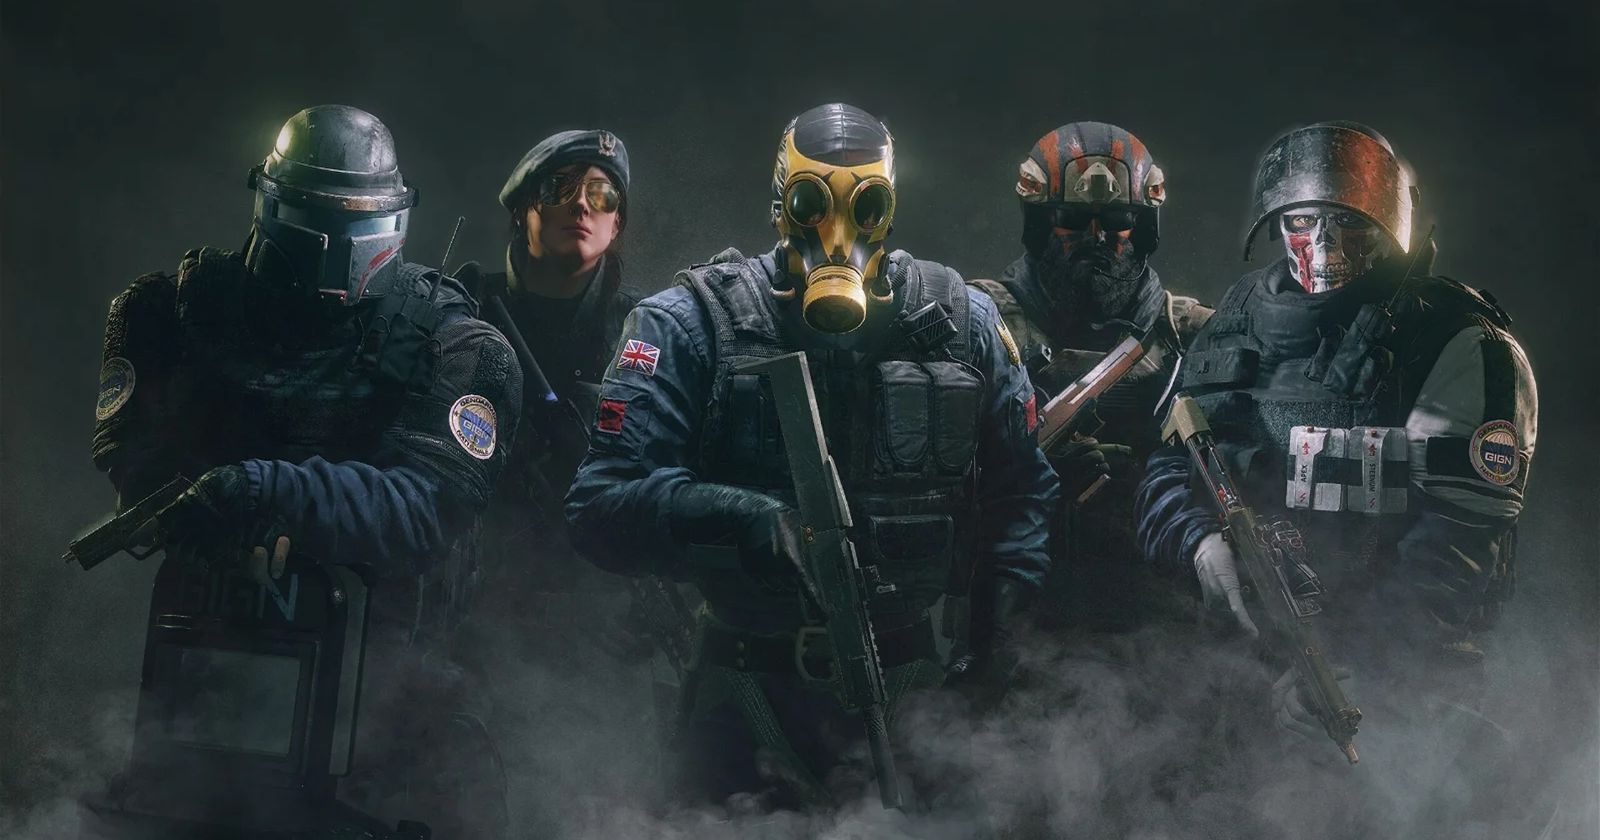 Rainbow Six Mobile Release Date - When is Rainbow Six Mobile coming out? —  SiegeGG